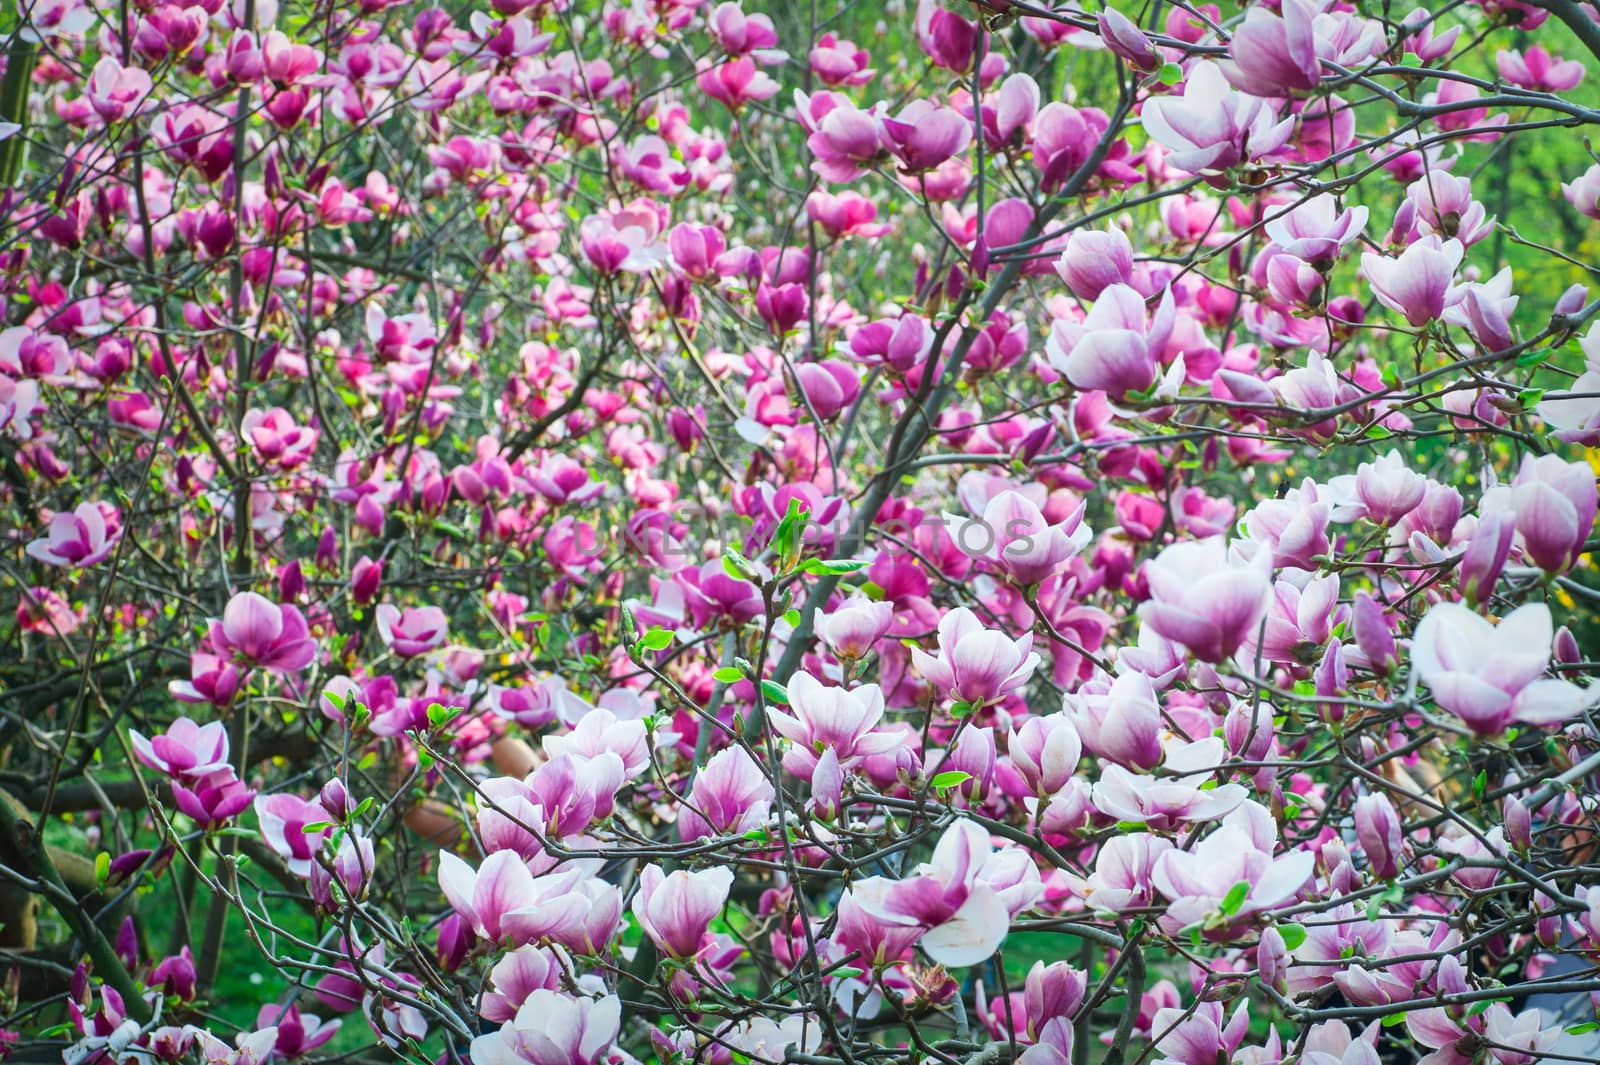 Pink blossoming magnolia trees in the spring garden by timonko